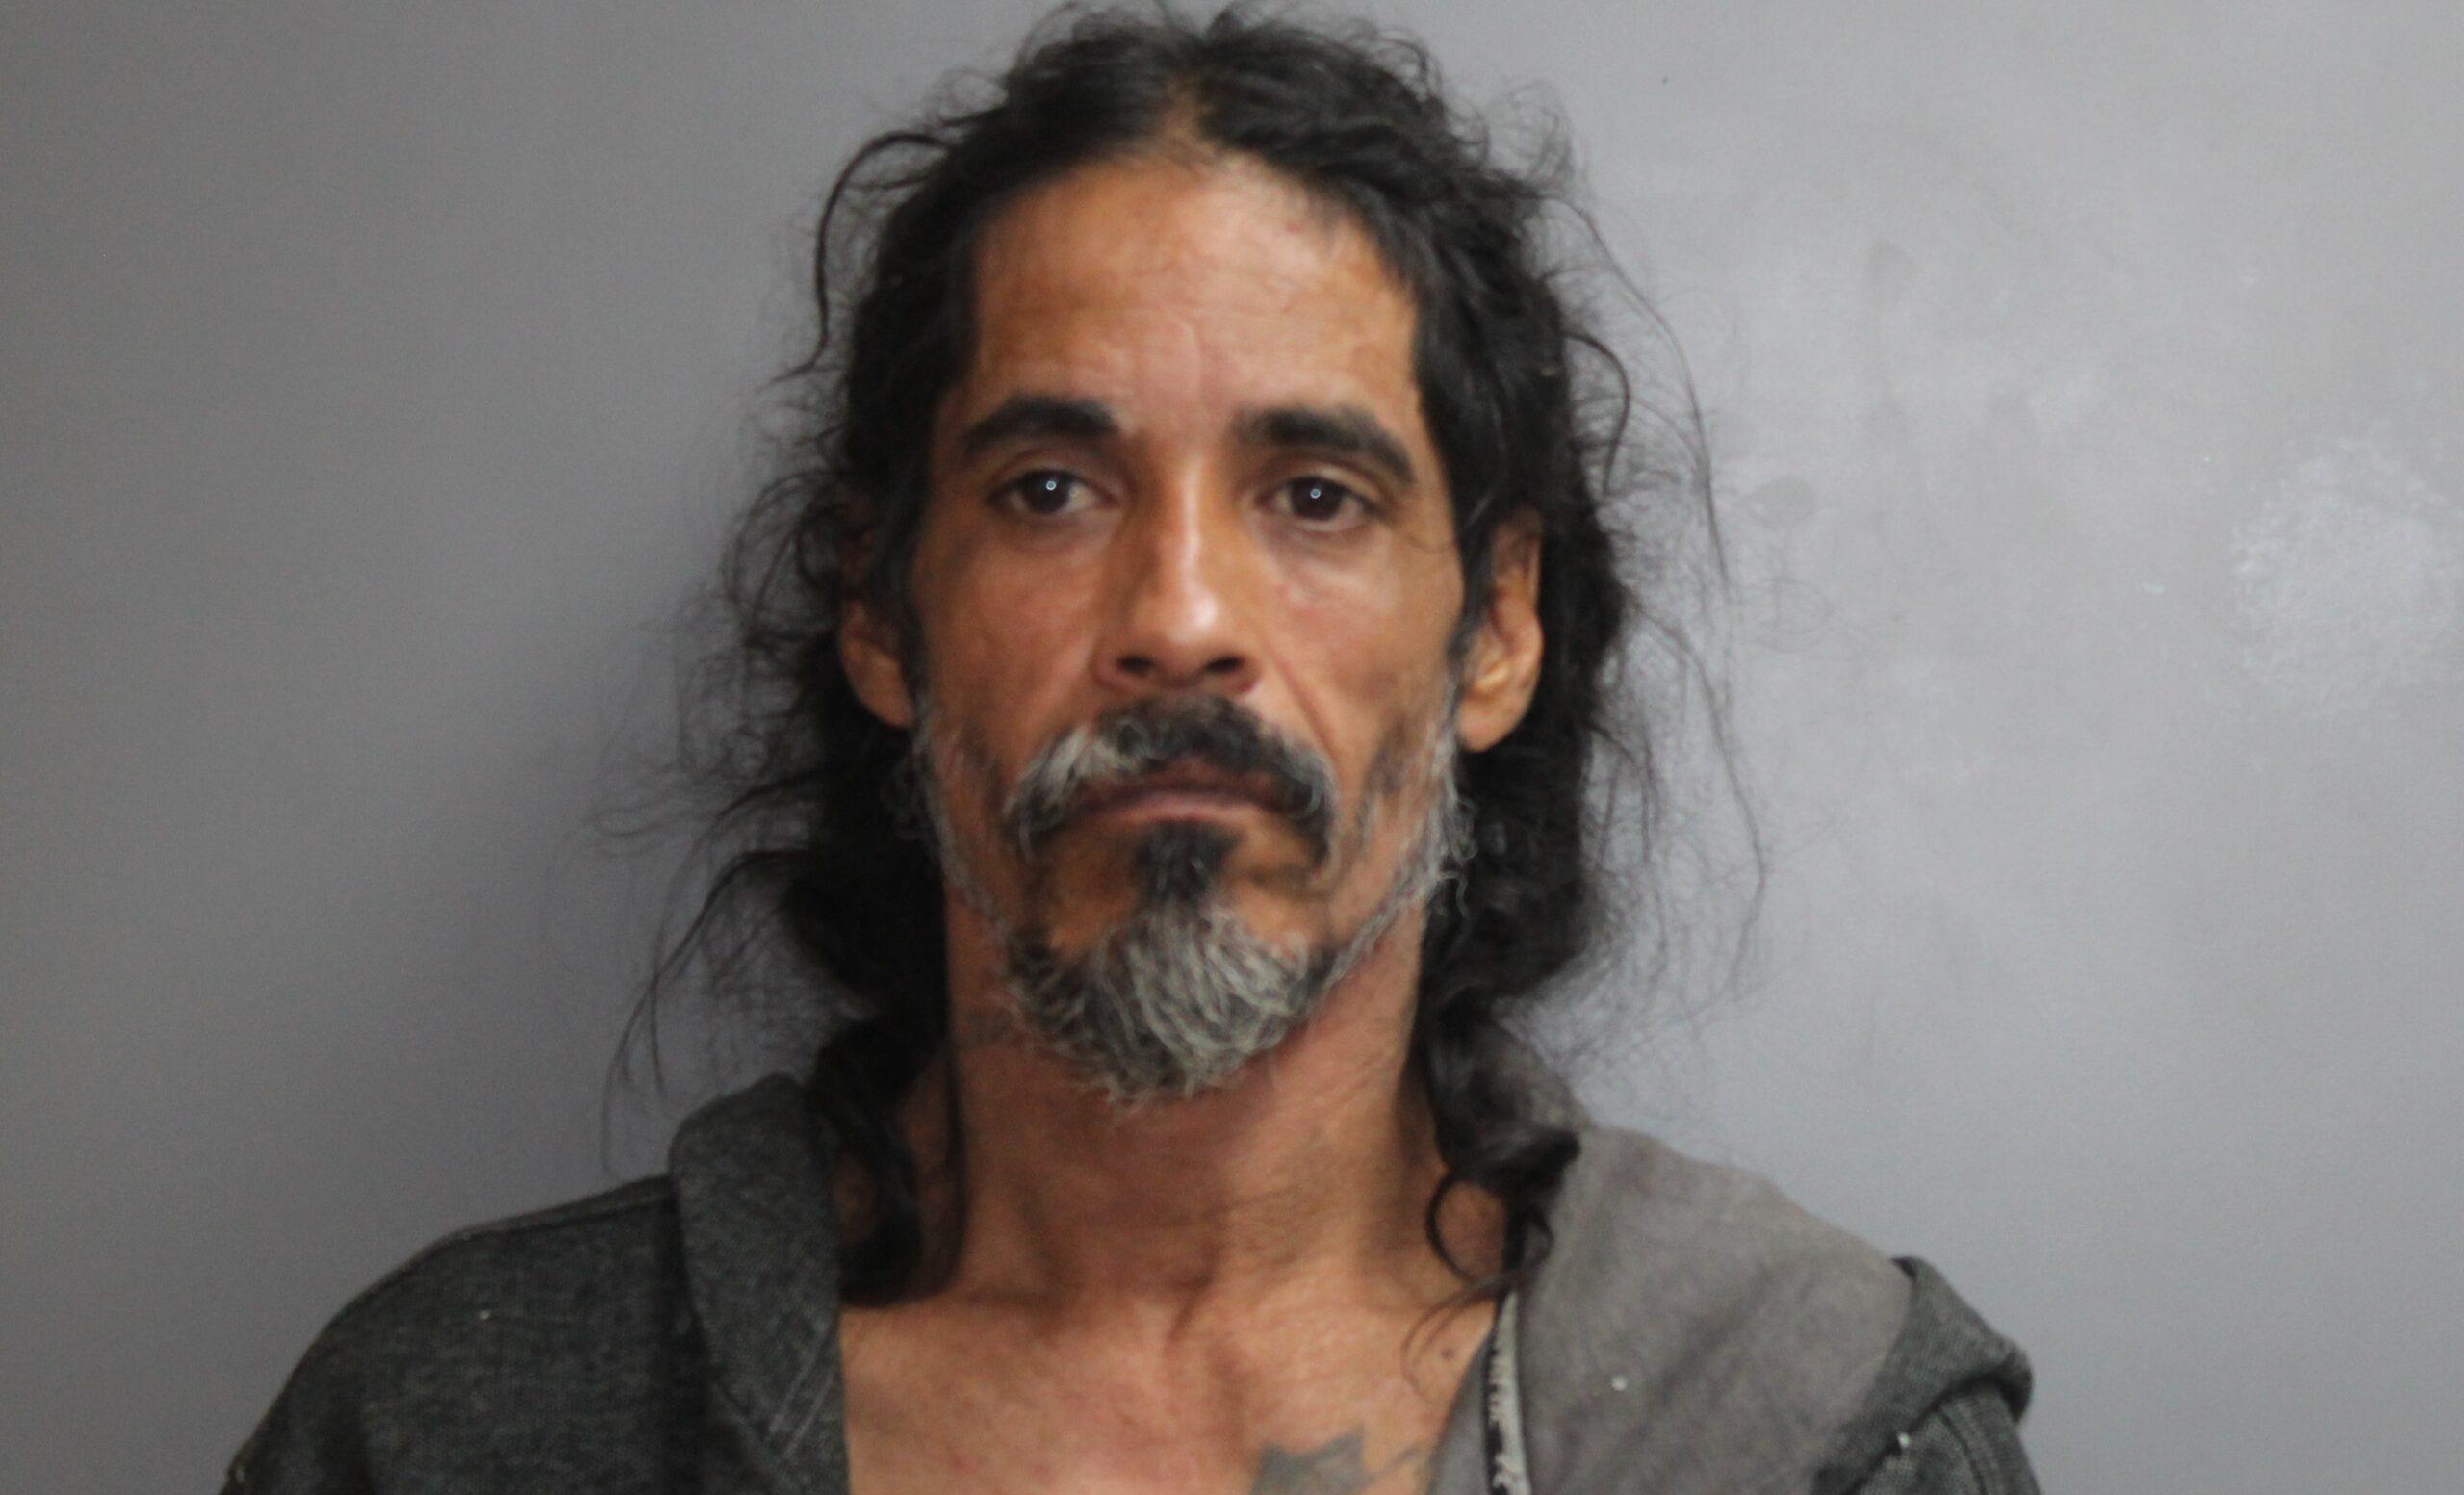 St. Croix Man Arrested After Confronting Woman With A Weapon After She Took Out Protective Order On Him